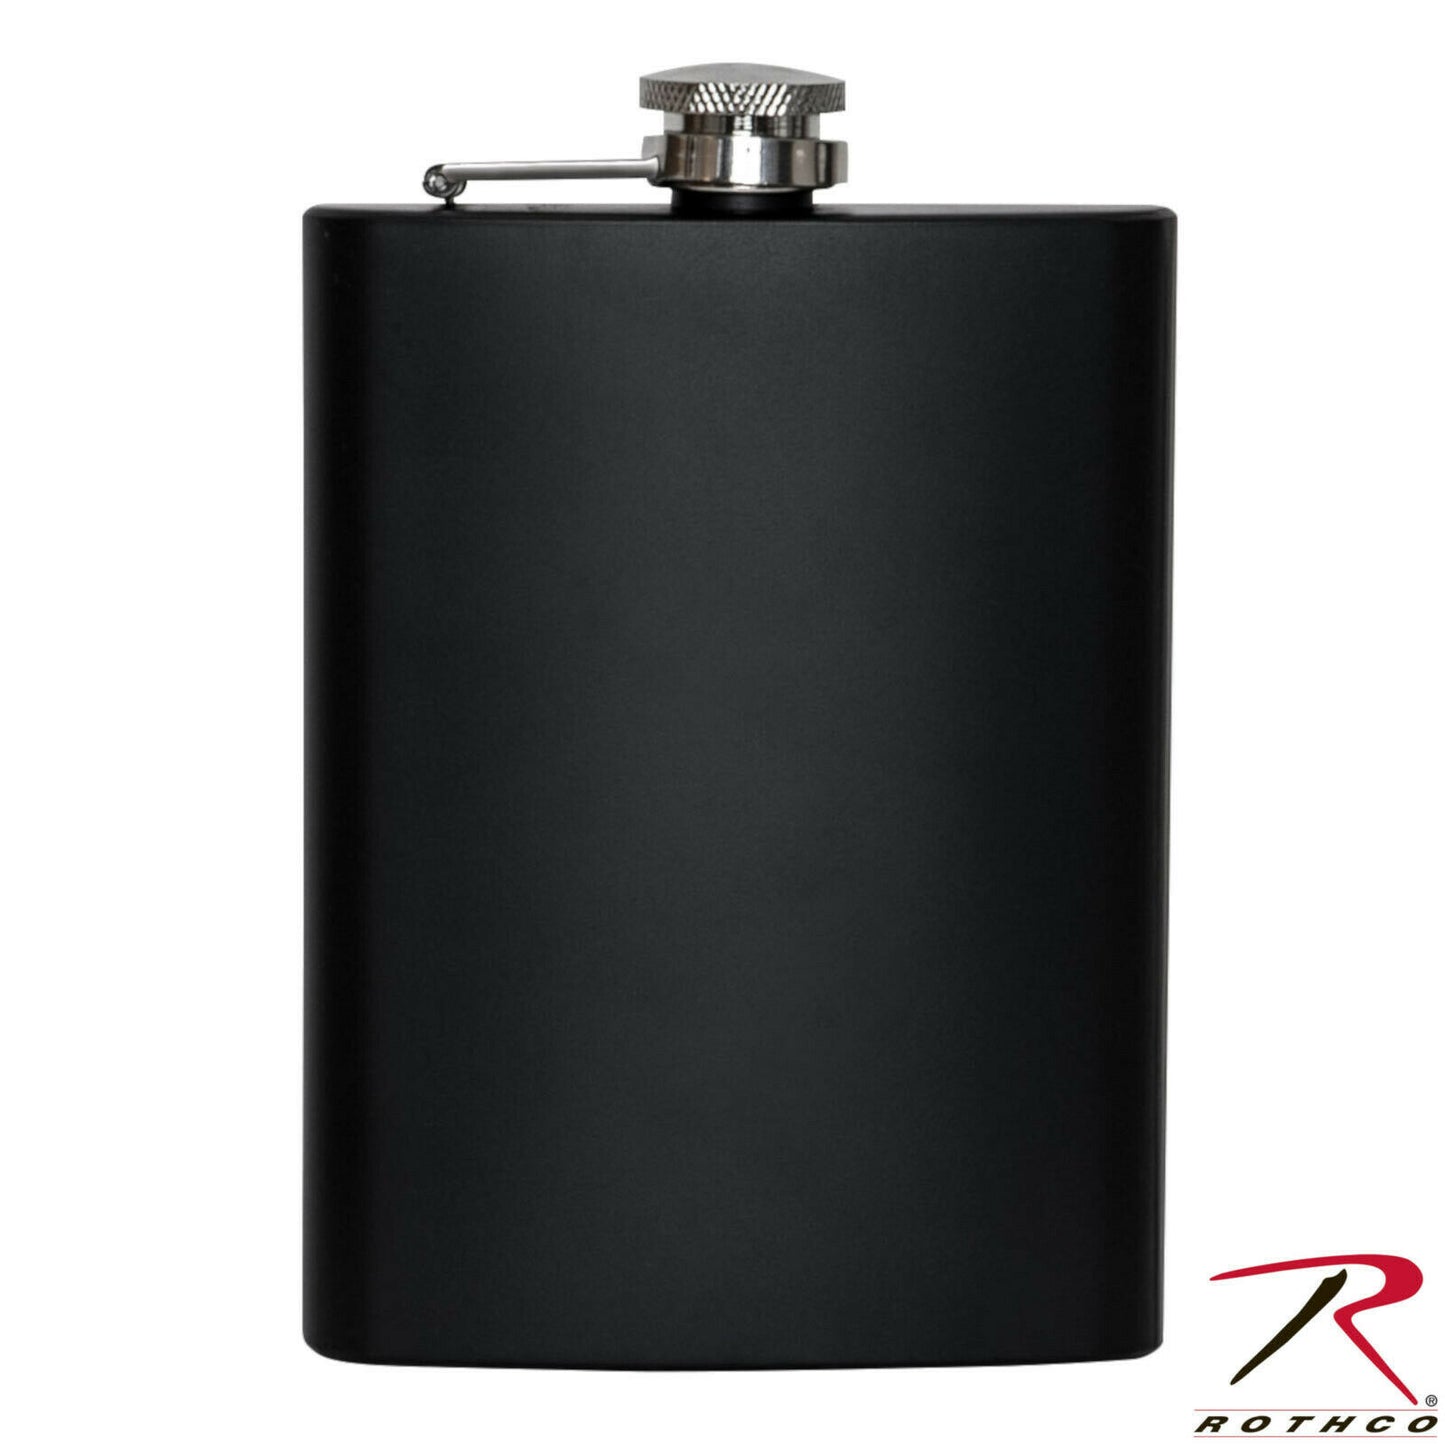 Rothco 8oz. Stainless Steel Black Flask w/ Hinged, Screw-Off Cap - 8 Ounce Flask